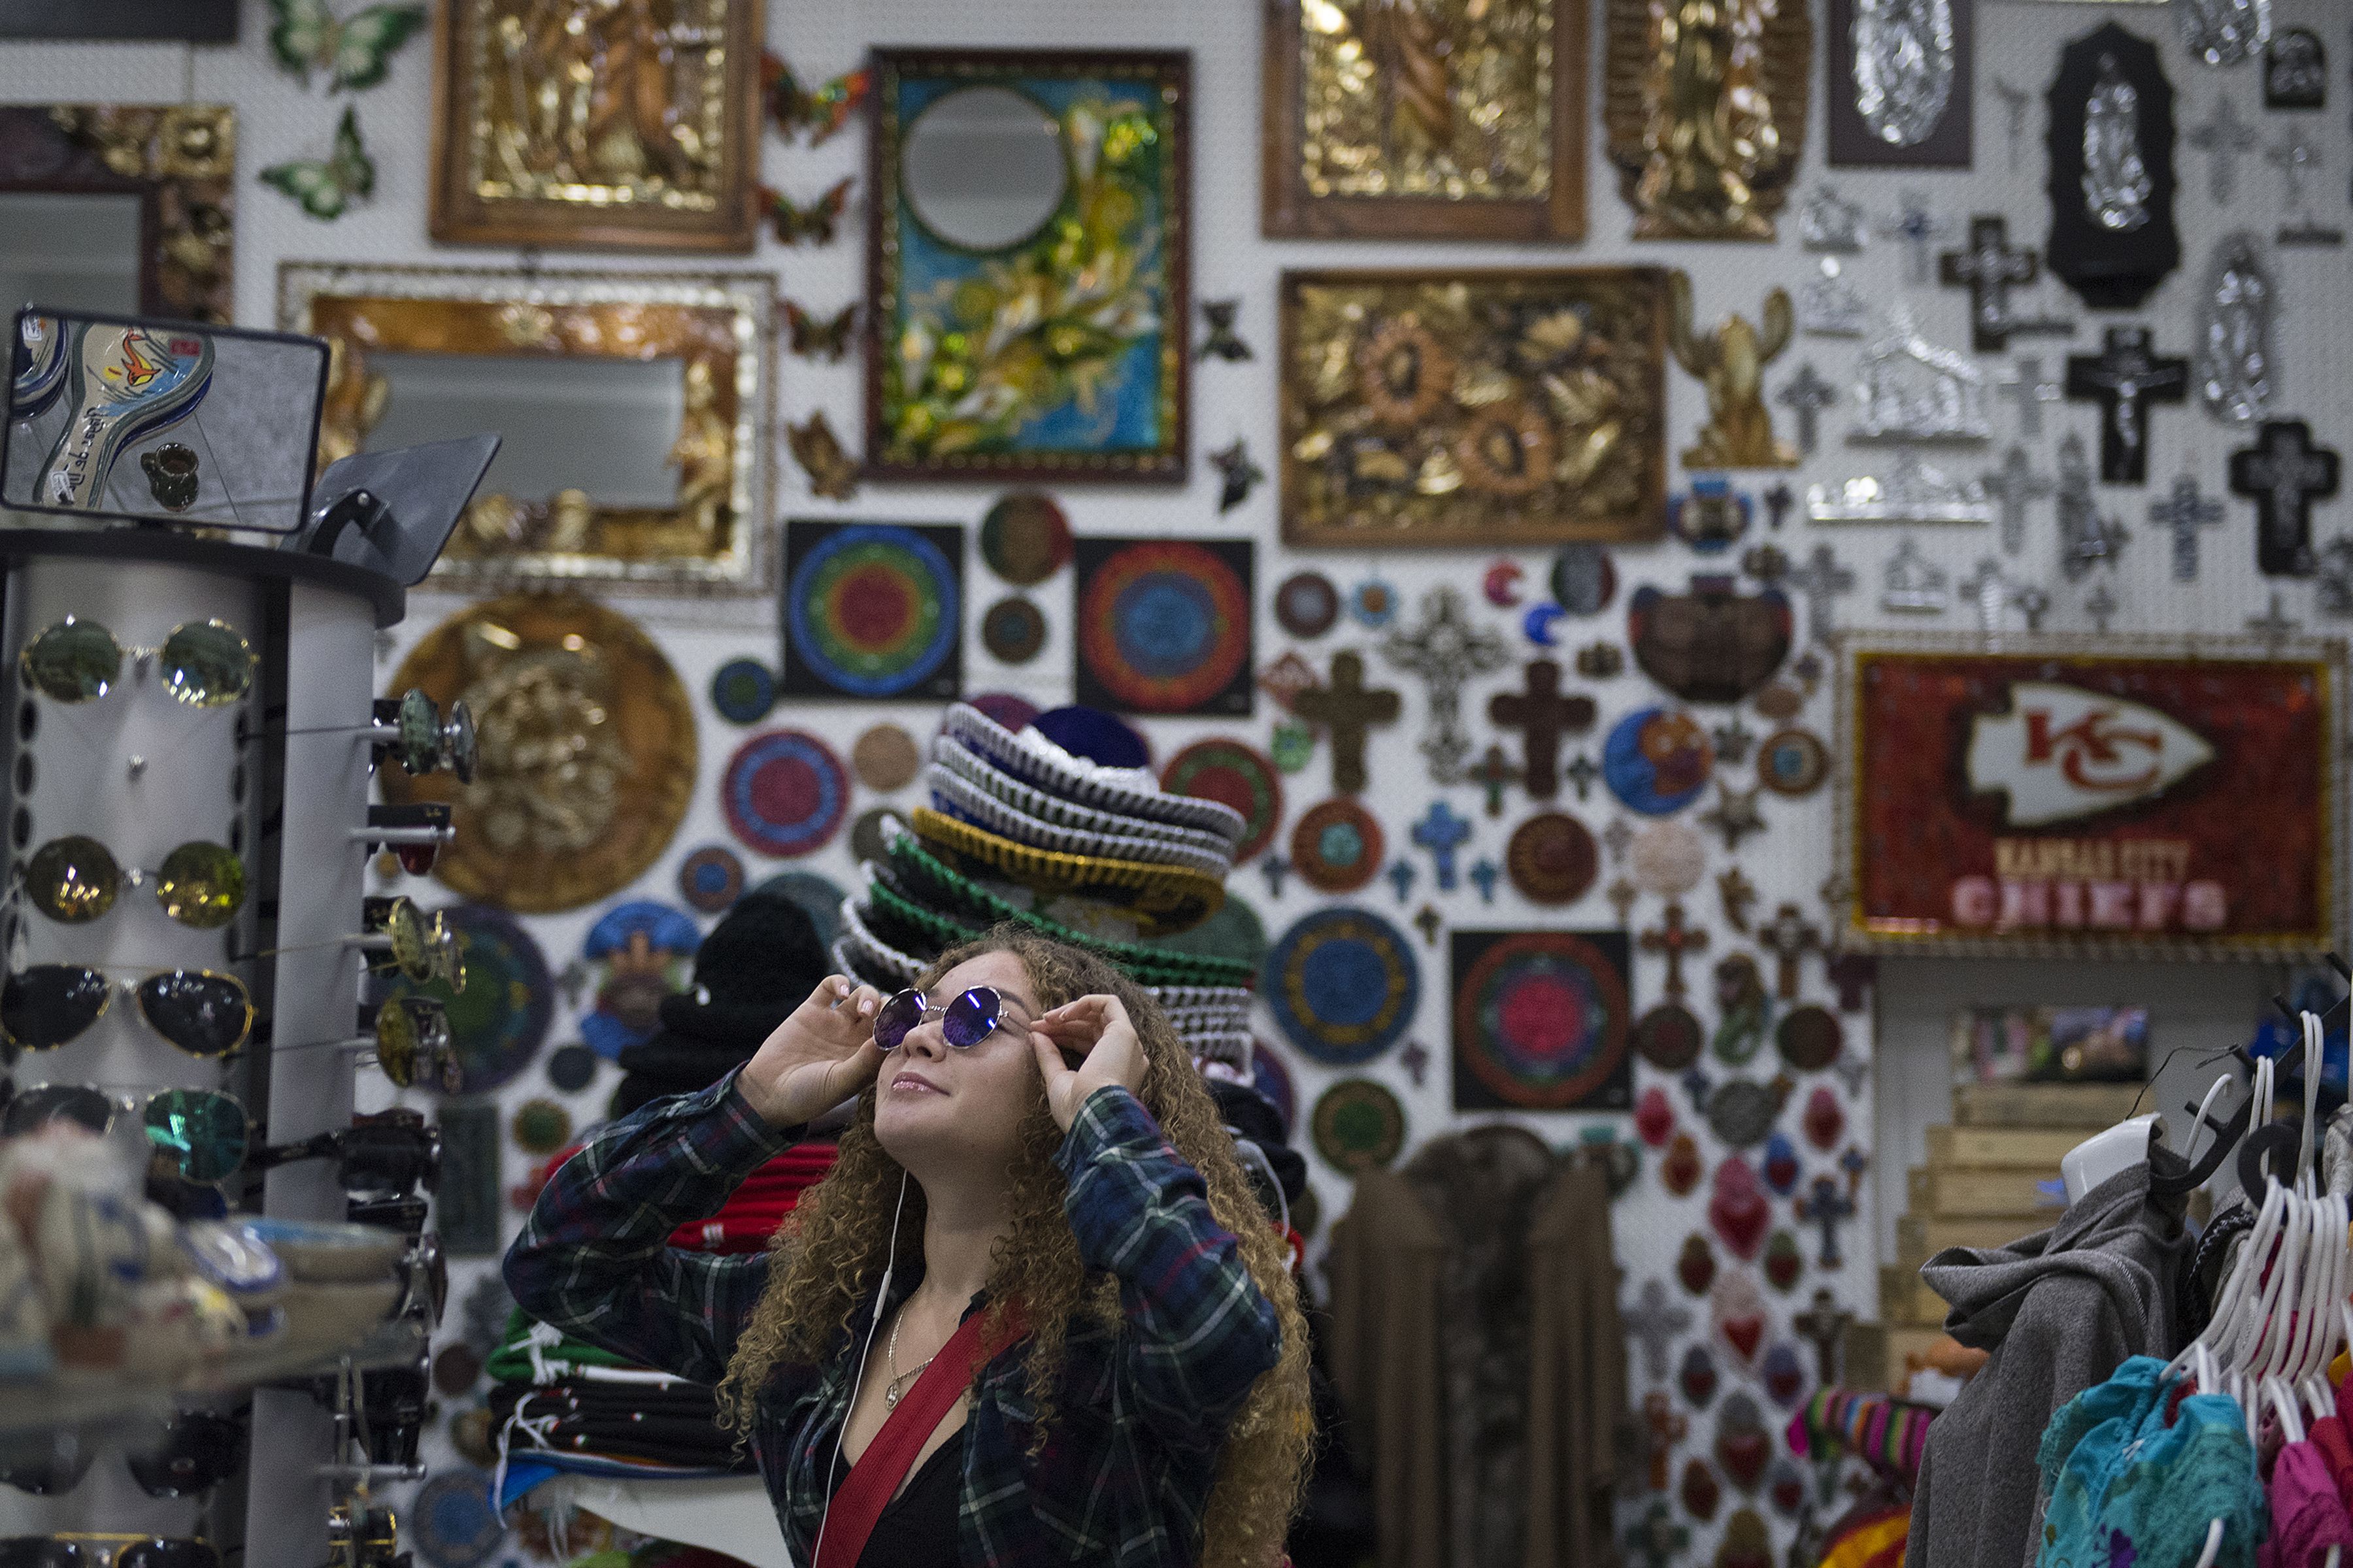 Kennedy Flores tries on a pair of sunglasses while shopping in downtown Tijuana with her family Nov. 30. Image by Amanda Cowan. Mexico, 2019.